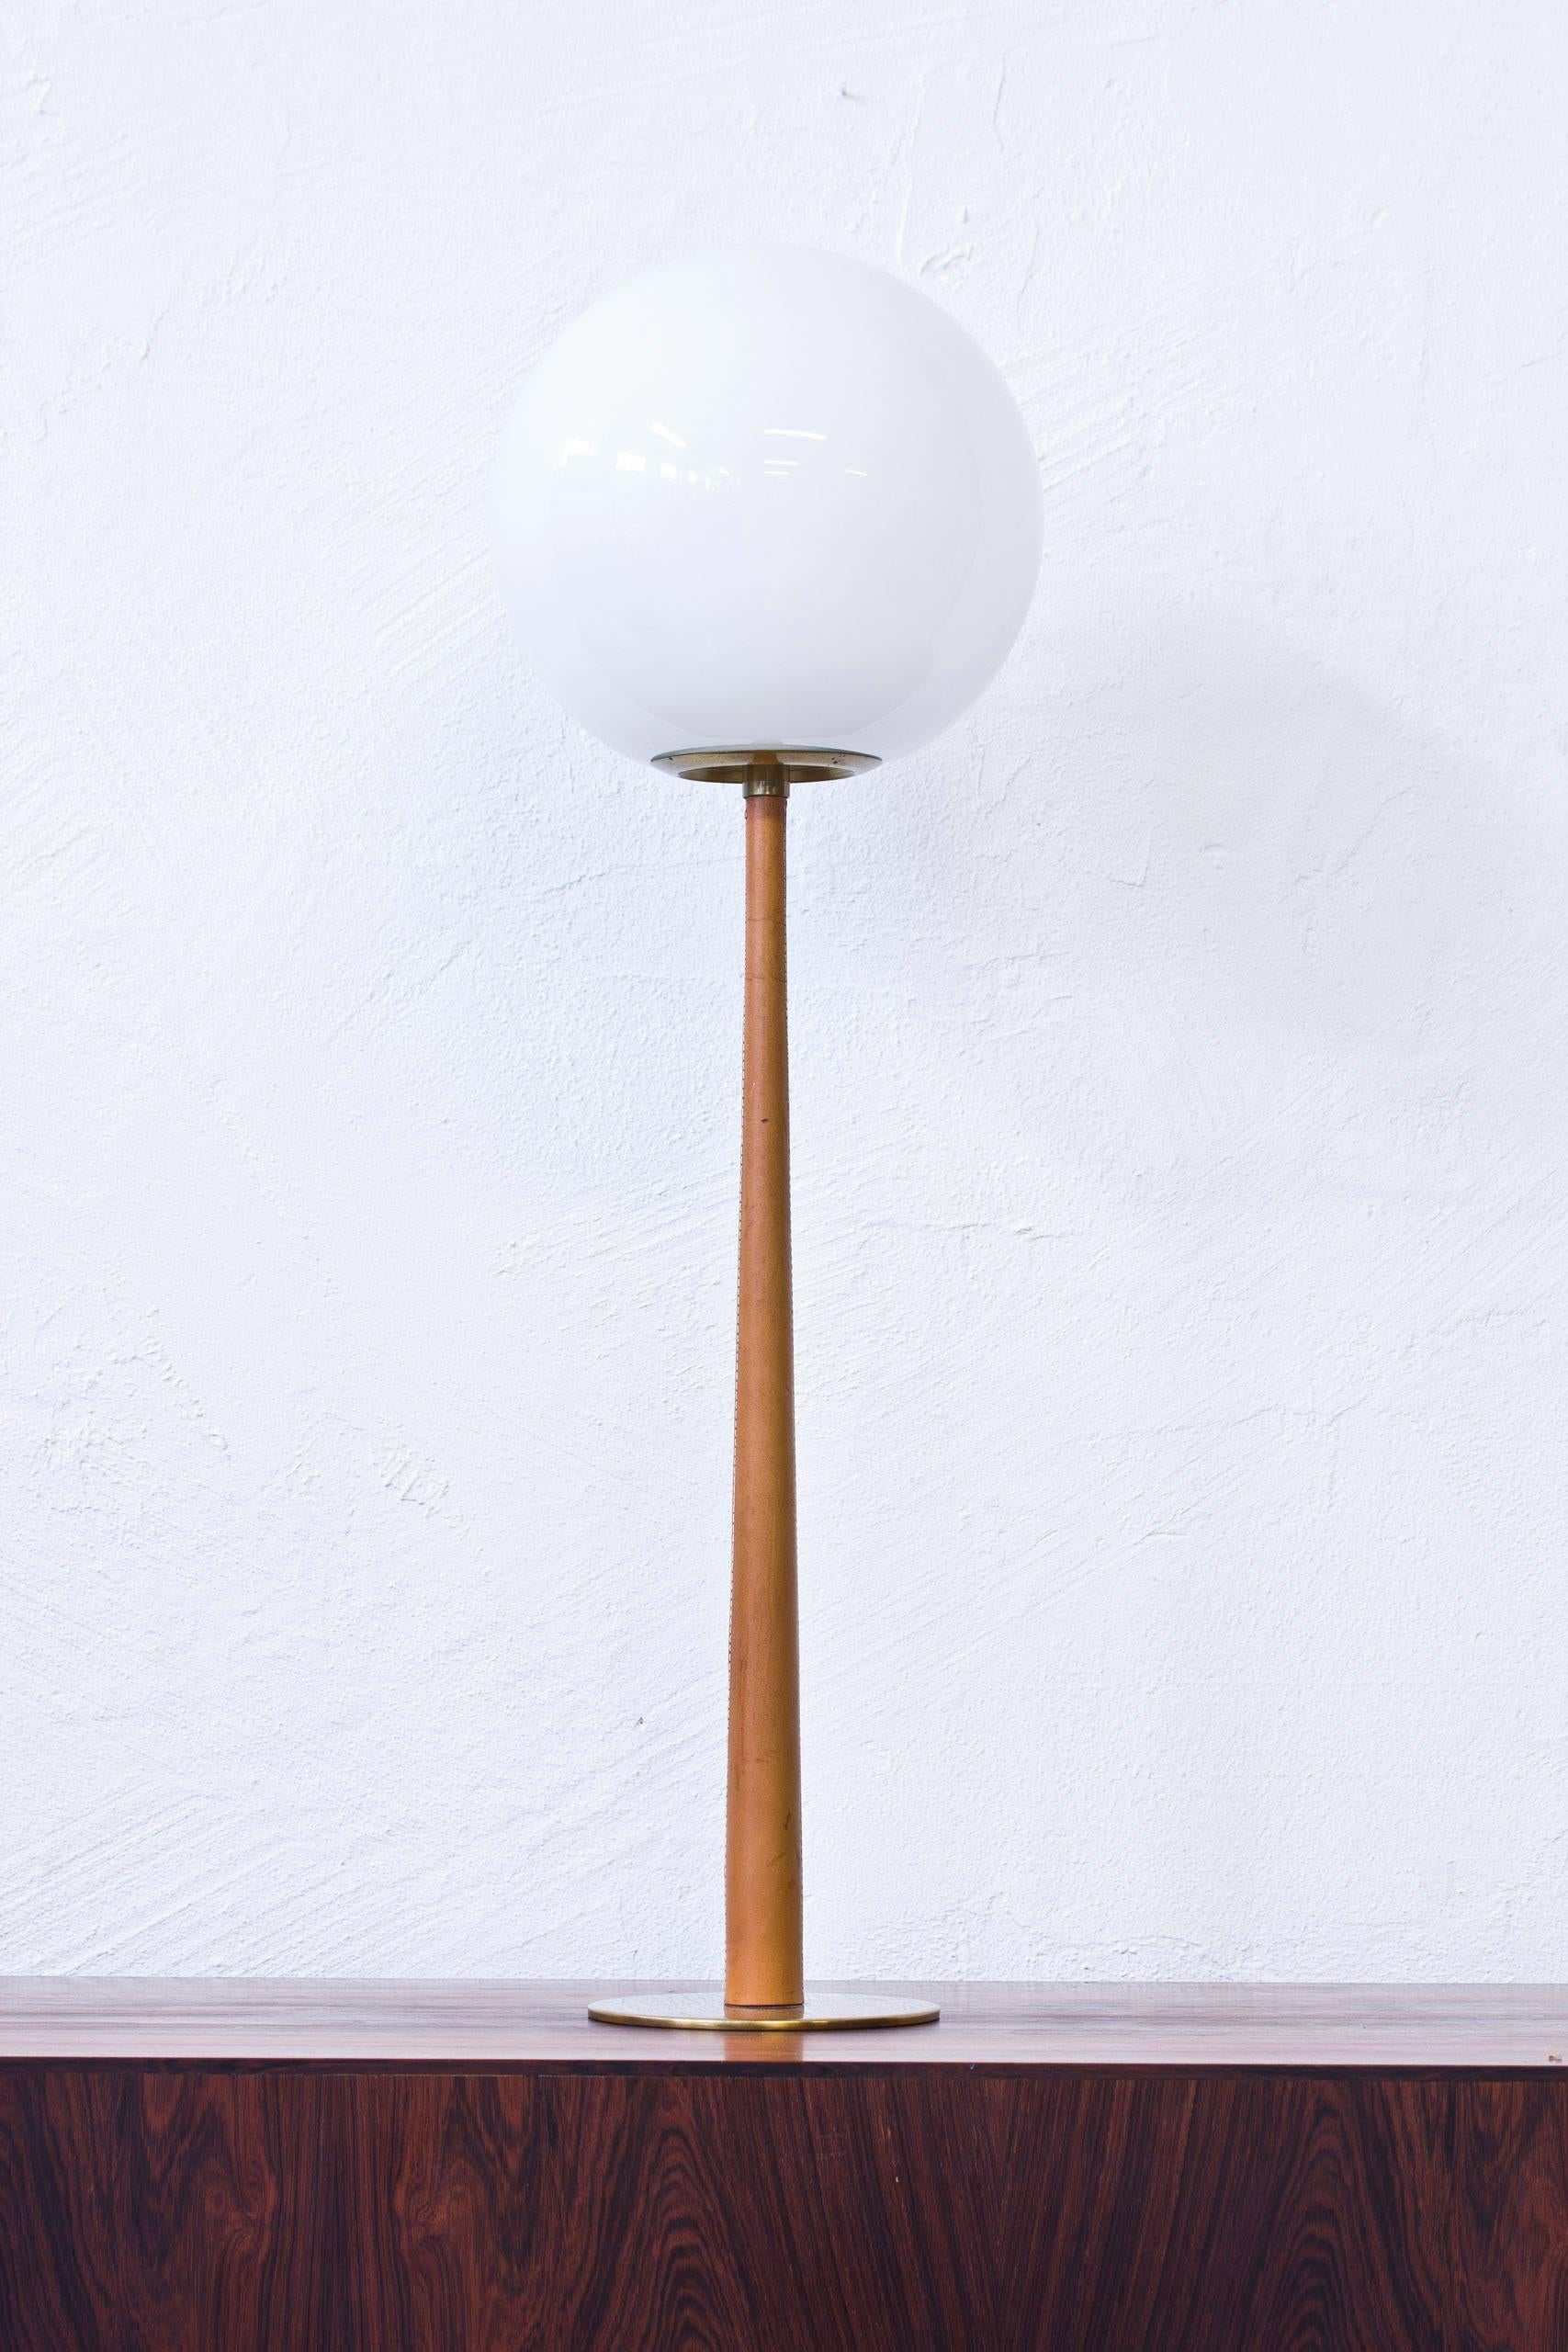 Rare table lamp model B 101 designed by Hans-Agne Jakobsson. Produced by his own company in Markaryd, Sweden during the 1960s. Solid polished brass base with leather wrapped stem and a large opaline glass shade. Light switch on the chord. Excellent